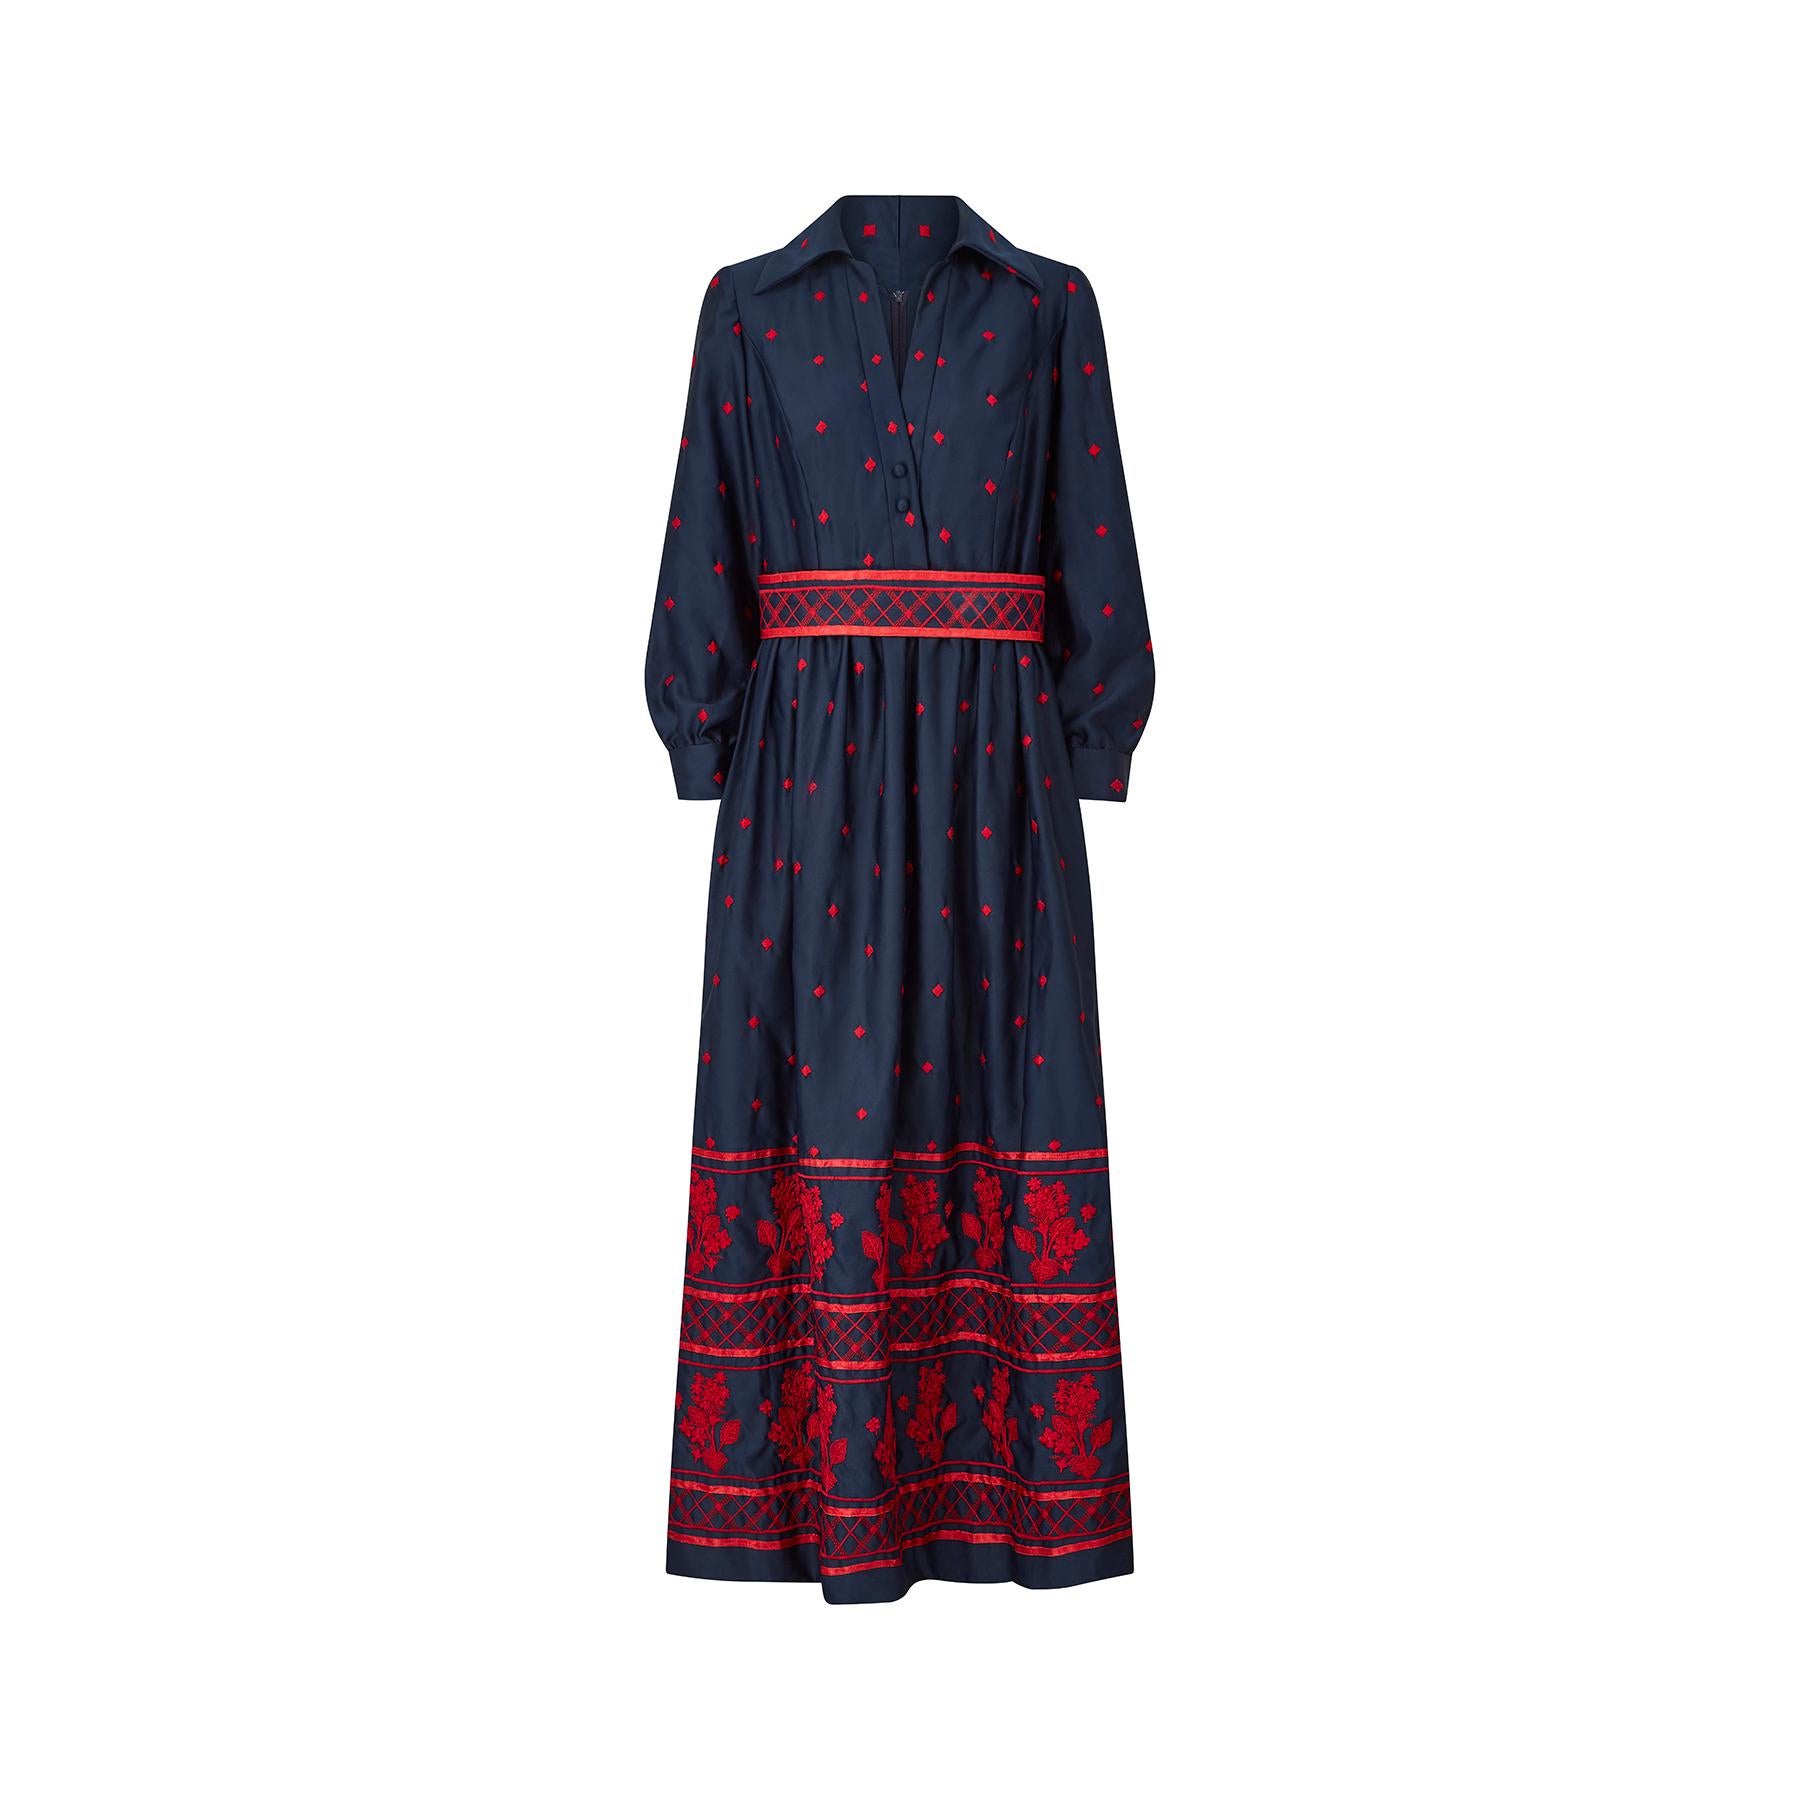 This is a really well made 1970s navy embroidered maxi dress by Brenner Couture. It's a smart shirt-waister style with a crossover V neck with two button fastenings and a pointed collar. The sleeves are gathered slightly at the cuff and are also